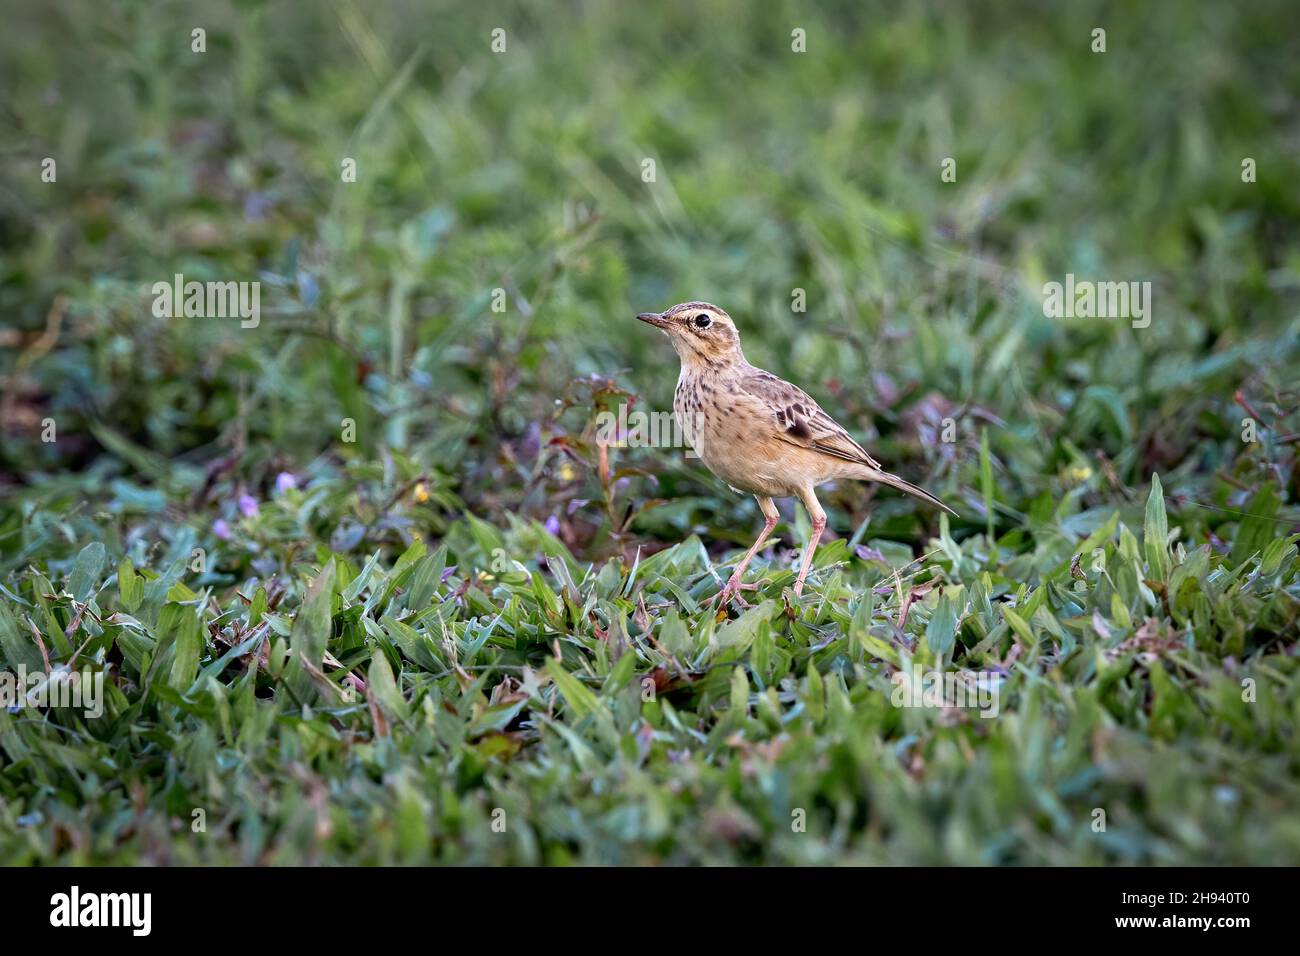 The paddyfield pipit or Oriental pipit (Anthus rufulus) is a small passerine bird in the pipit and wagtail family.It is a resident (non-migratory) bre Stock Photo